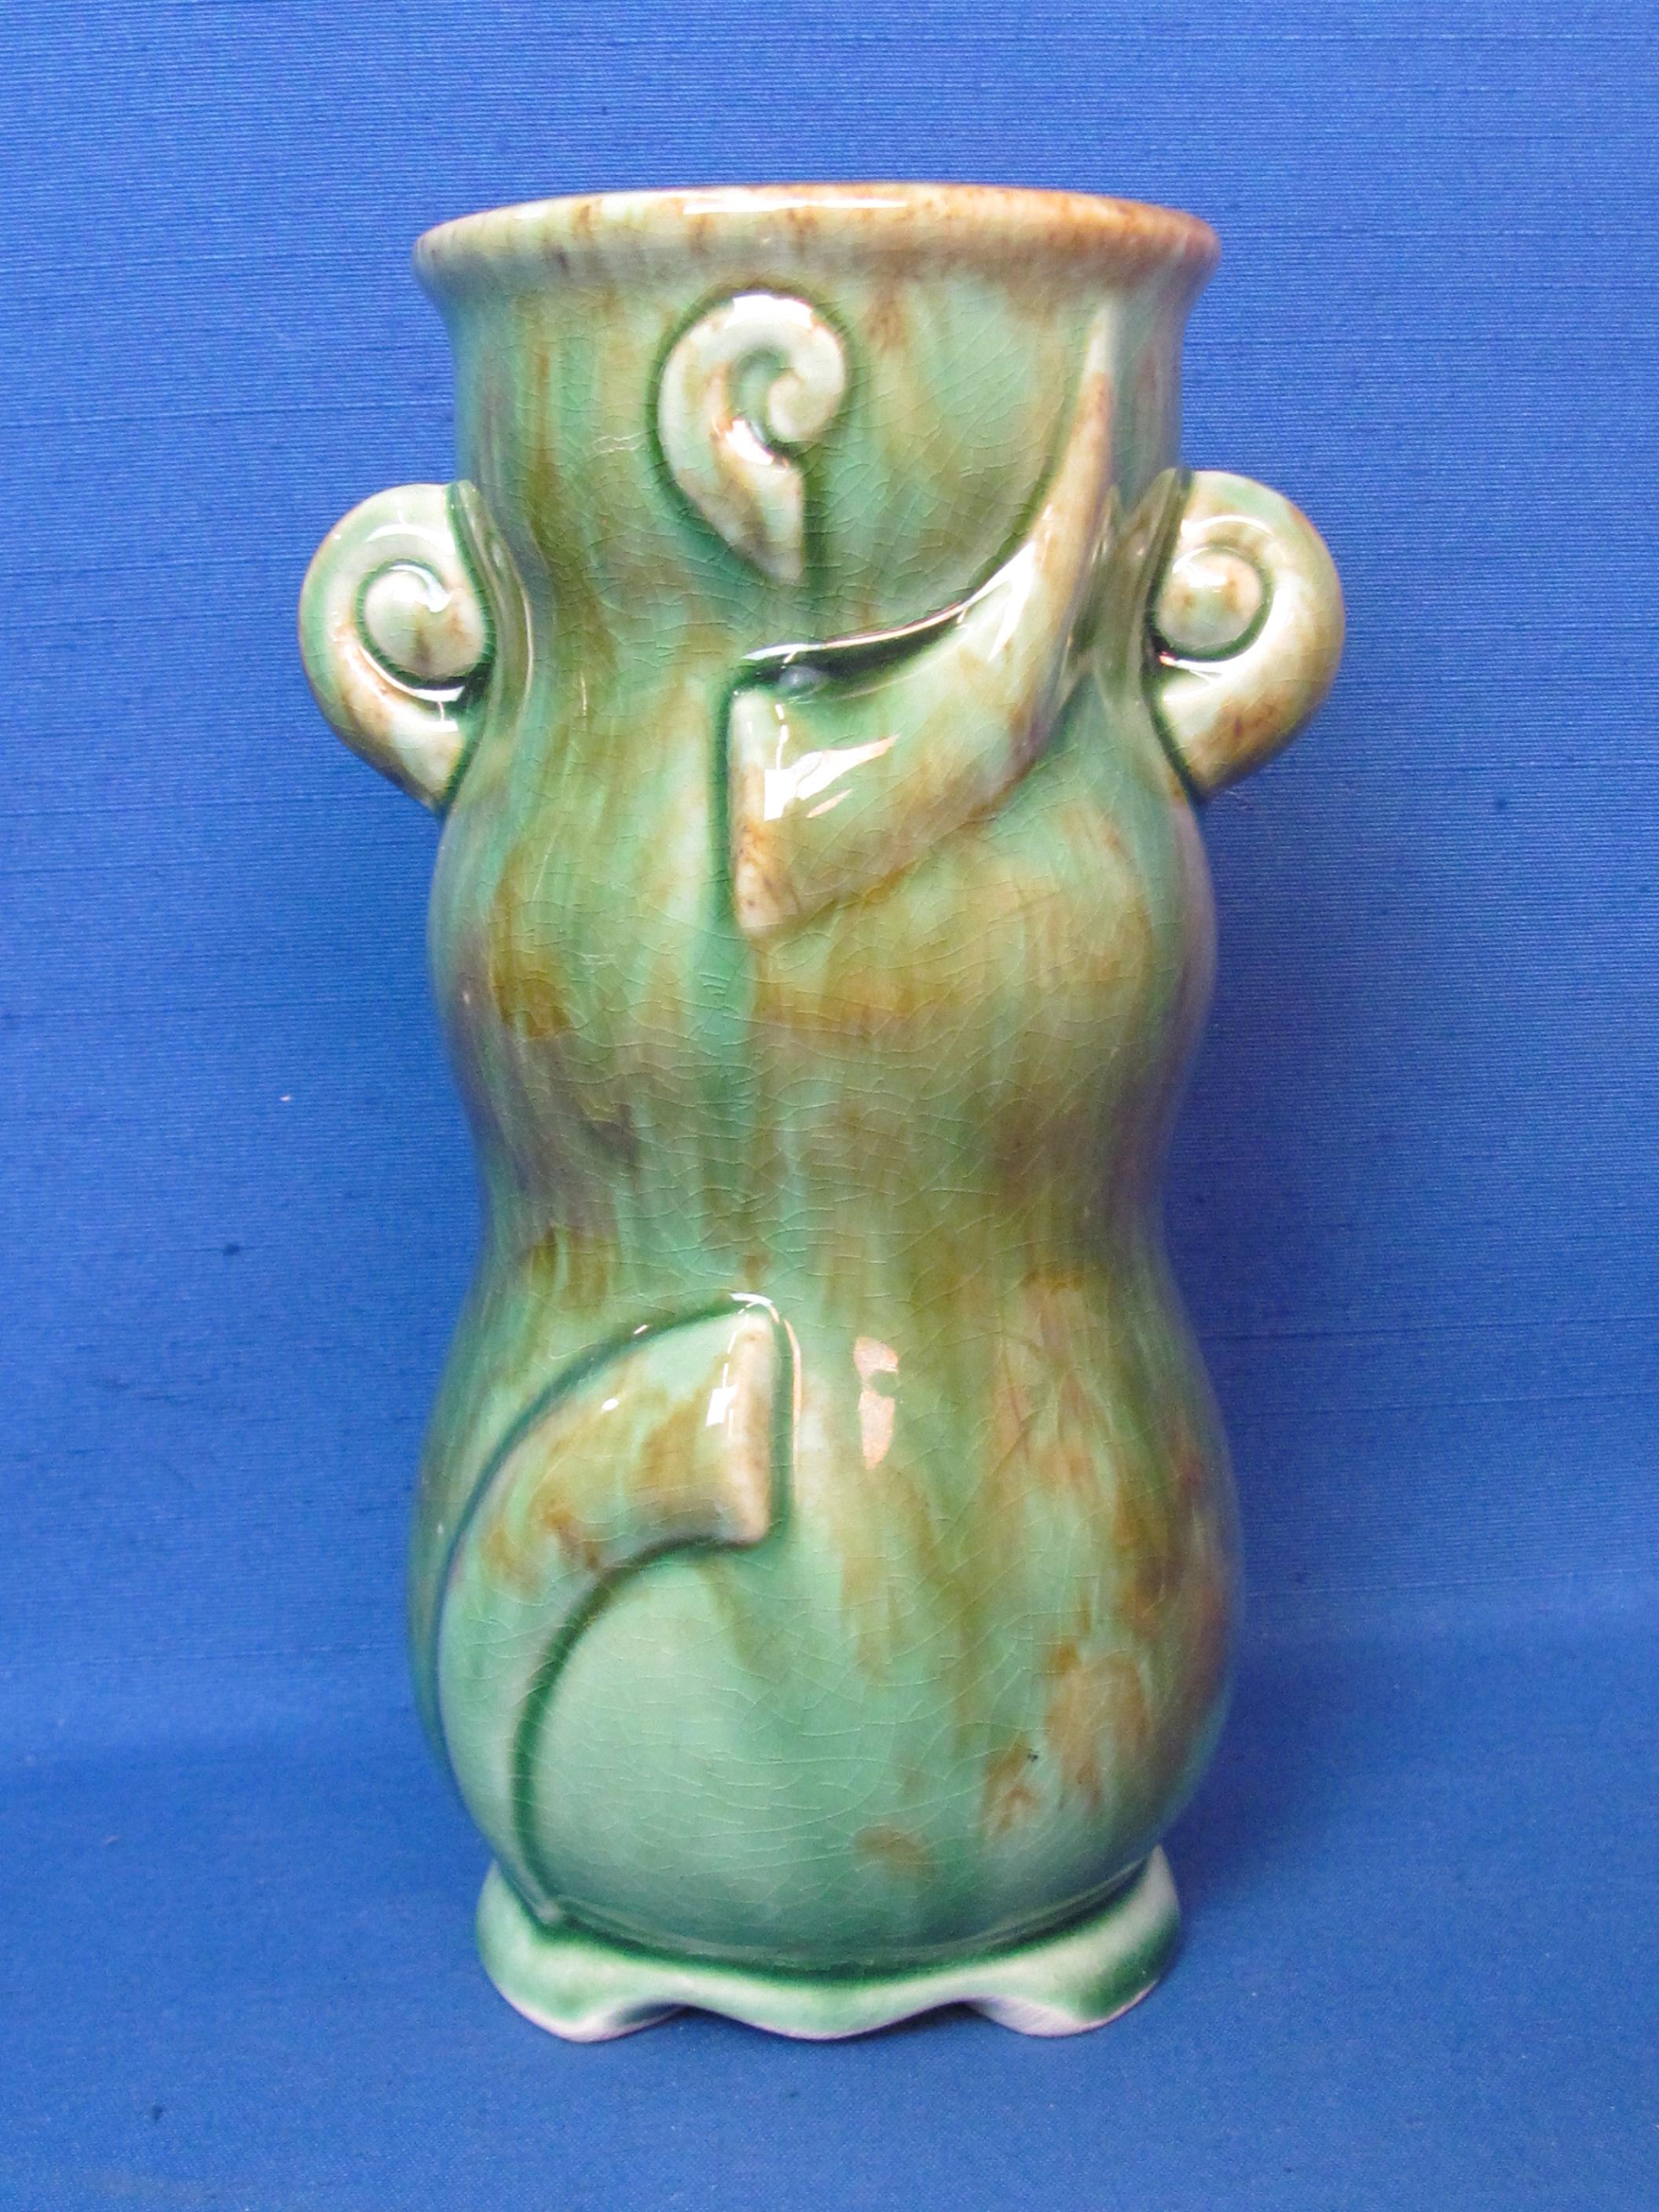 Vintage Pottery Vase – Green/Brown – Royal Copley or American Bisque – 7 1/2” tall